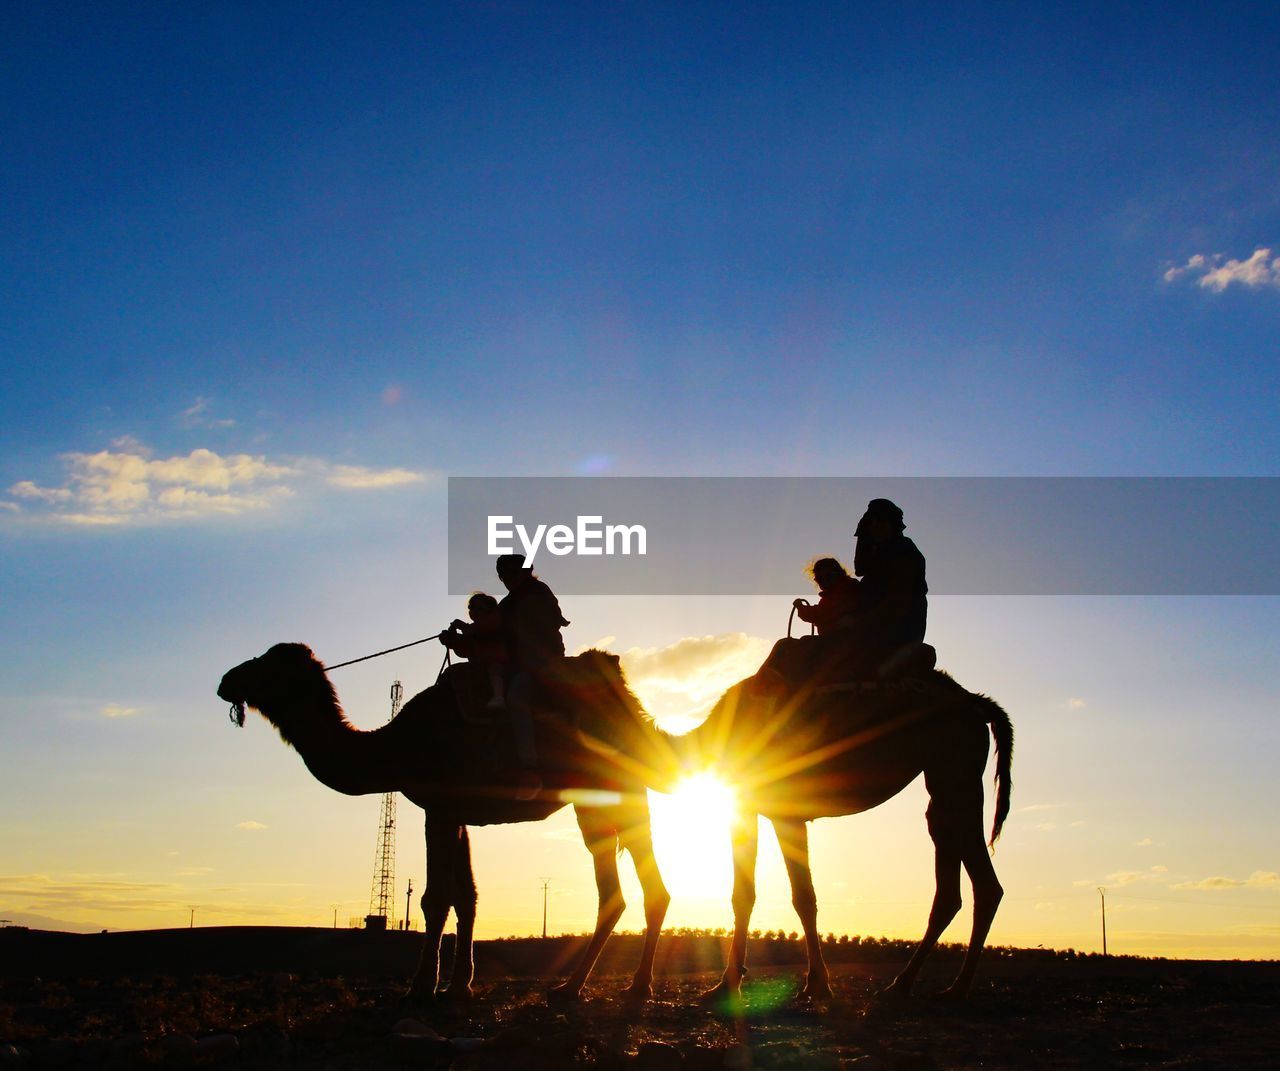 camel, sky, sunset, natural environment, mammal, silhouette, nature, landscape, animal, domestic animals, land, animal themes, desert, adult, sunlight, sun, riding, activity, travel, men, sand, arabian camel, togetherness, back lit, two people, motion, outdoors, leisure activity, beauty in nature, travel destinations, scenics - nature, pet, side view, working animal, cloud, dusk, lifestyles, copy space, animal wildlife, full length, lens flare, blue, environment, sand dune